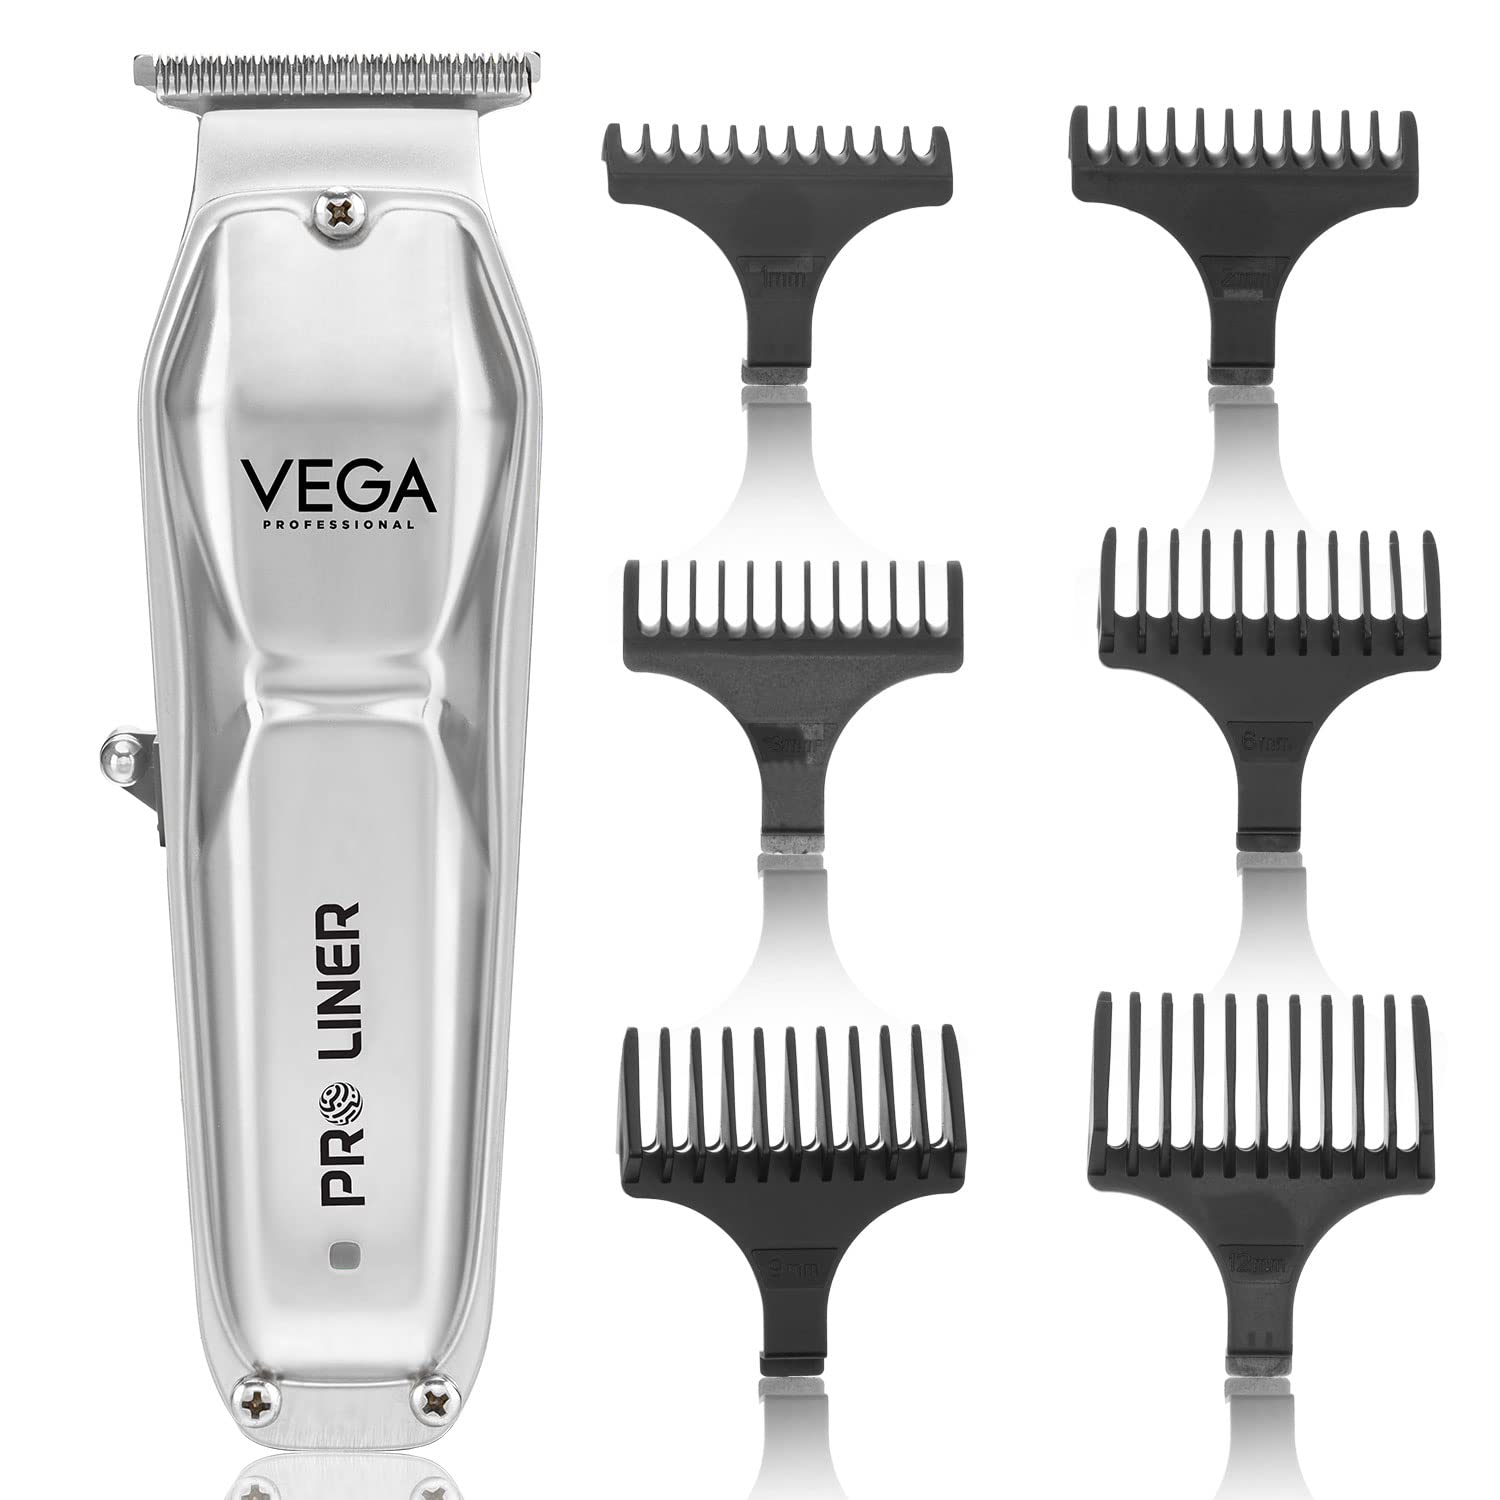 VEGA Professional Pro Liner Hair Trimmer with 240 mins Runtime, (VPPHT-03), Silver